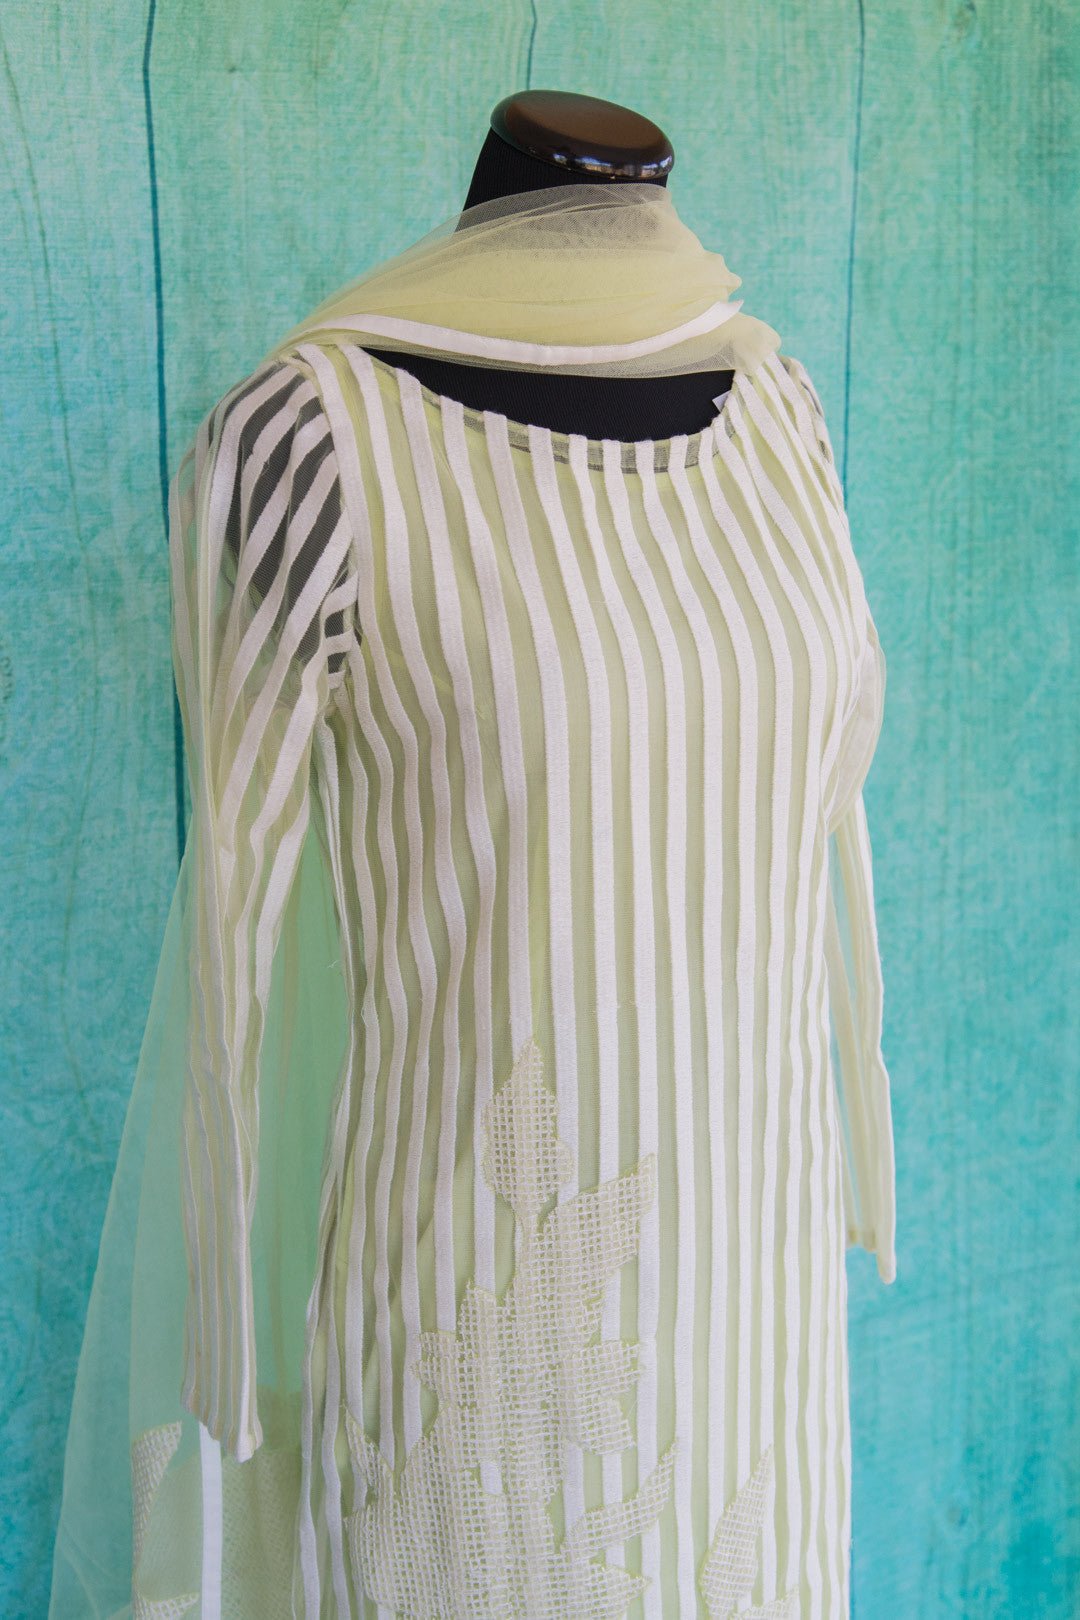 501073-suit-long-sleeve-pale-green-white-striped-scarf-alternate-view